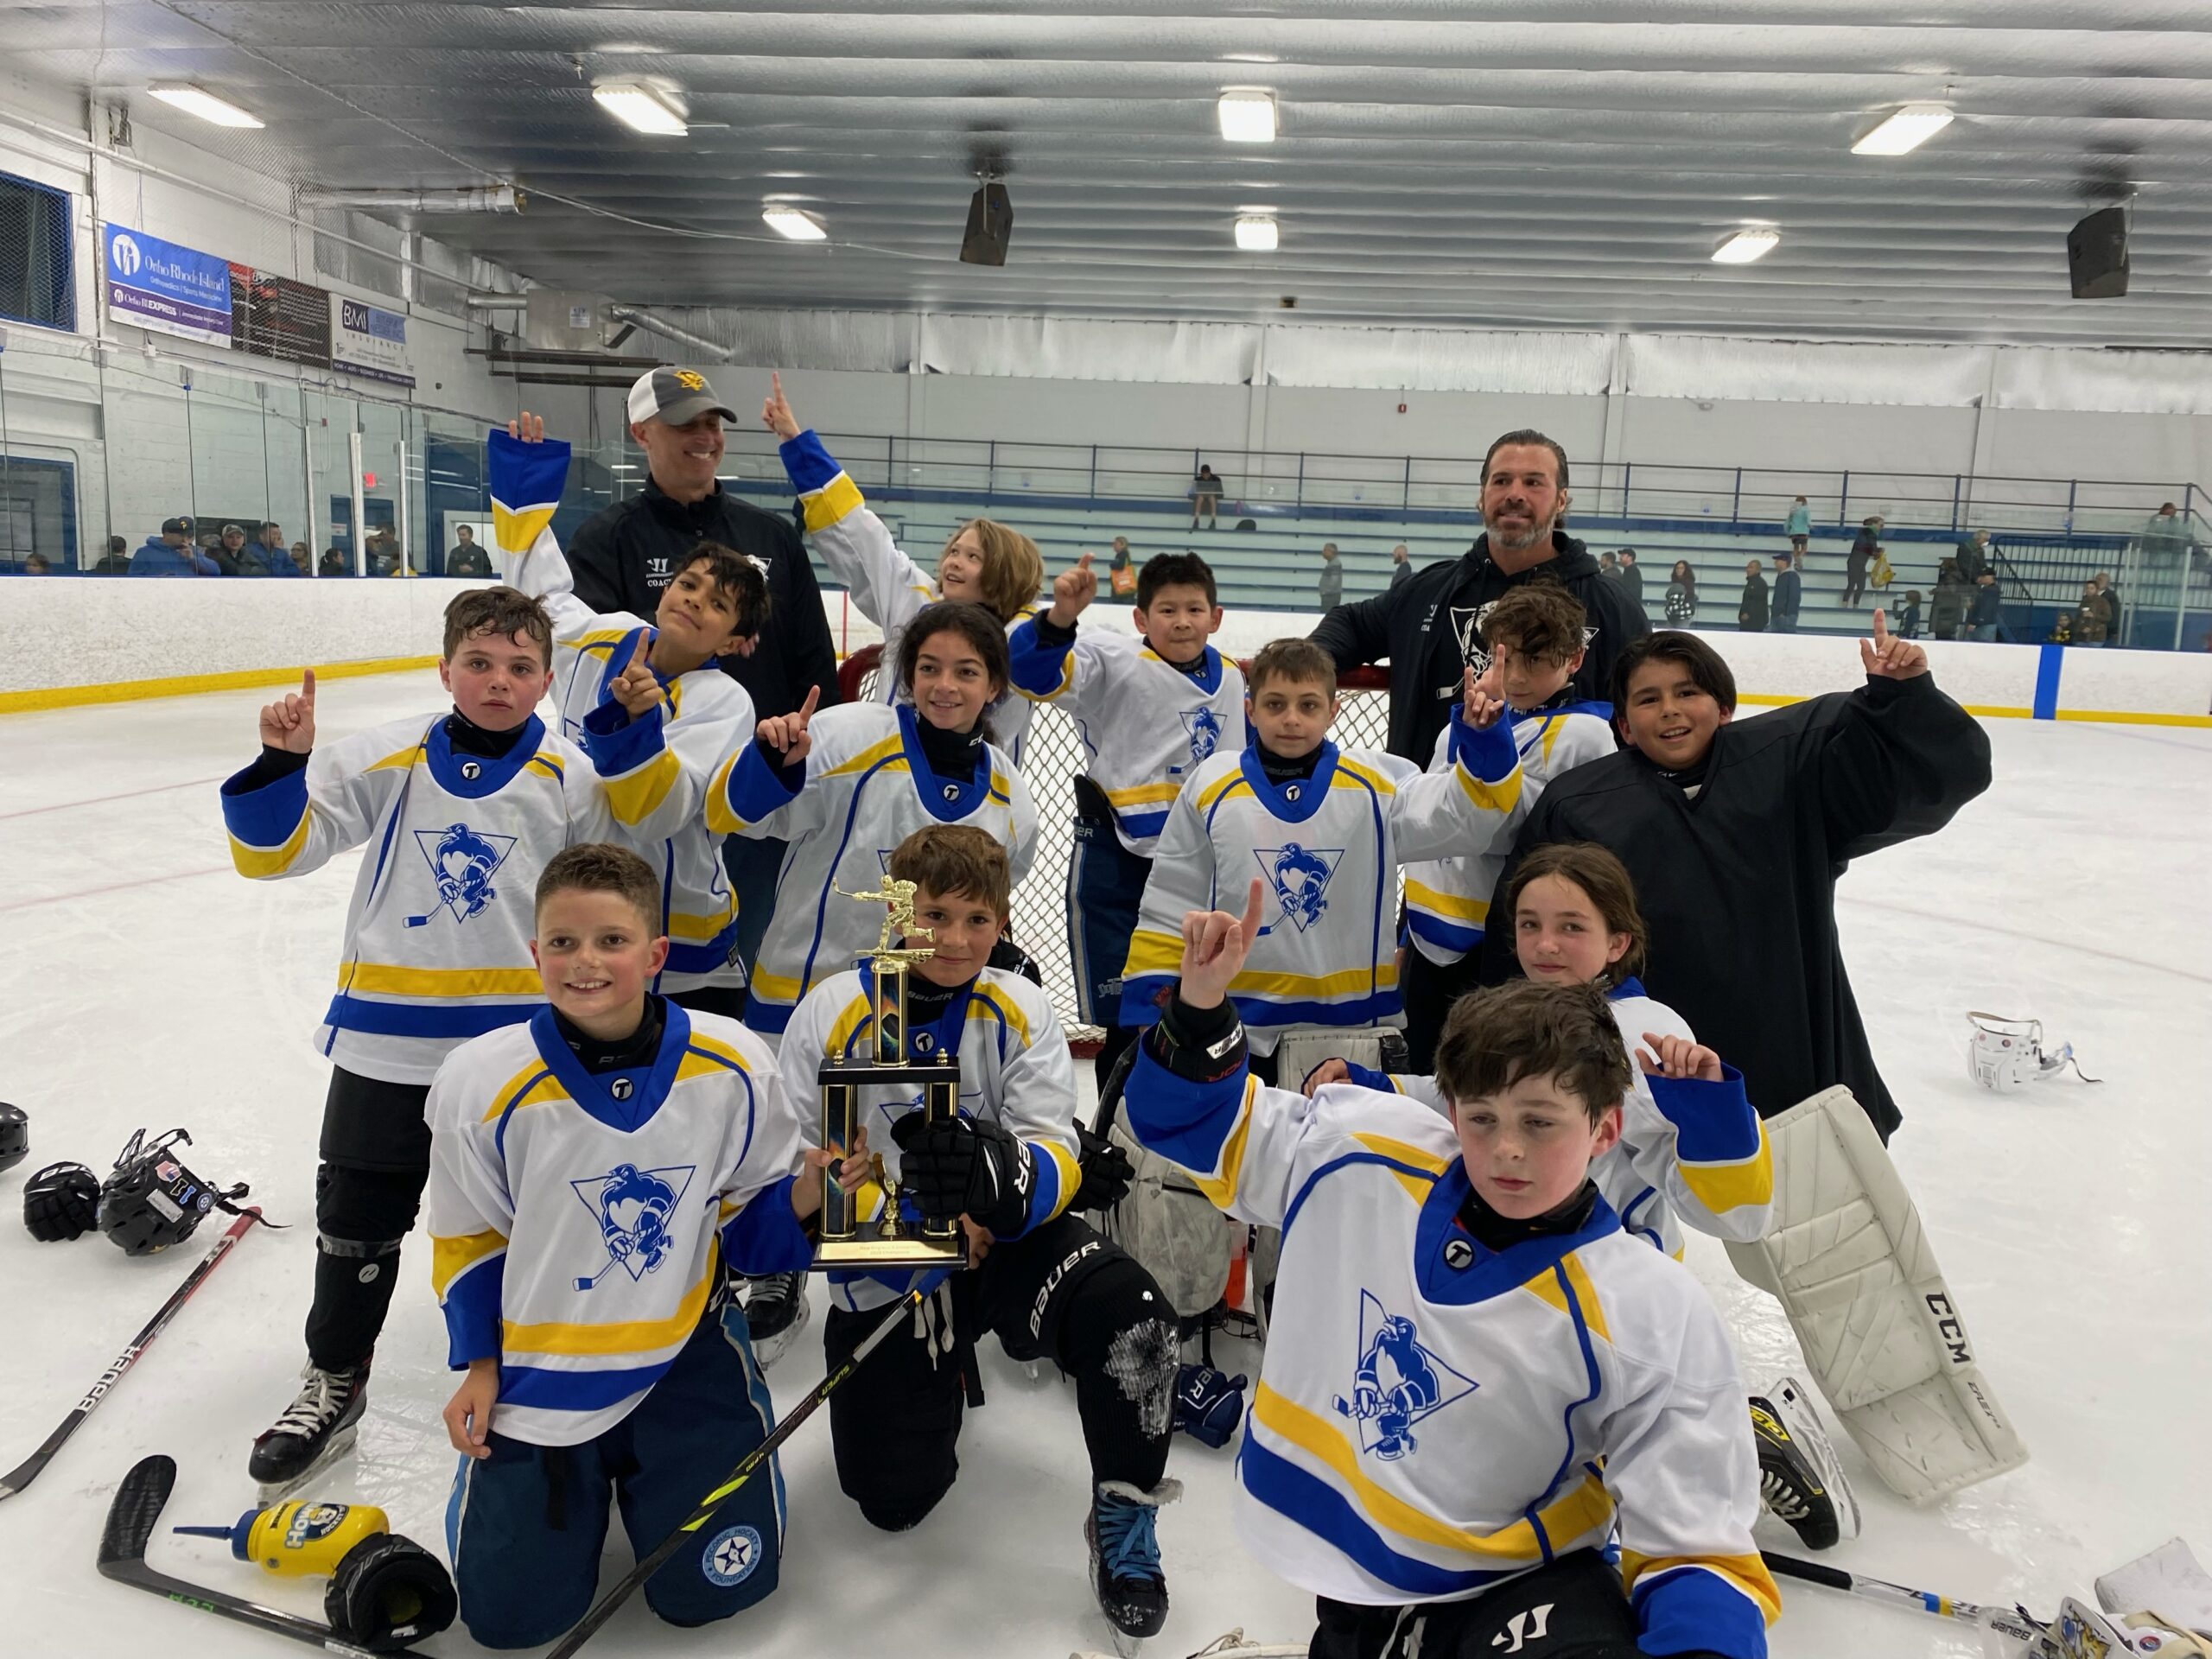 Lake Placid tournament won by youth hockey team from Roanoke